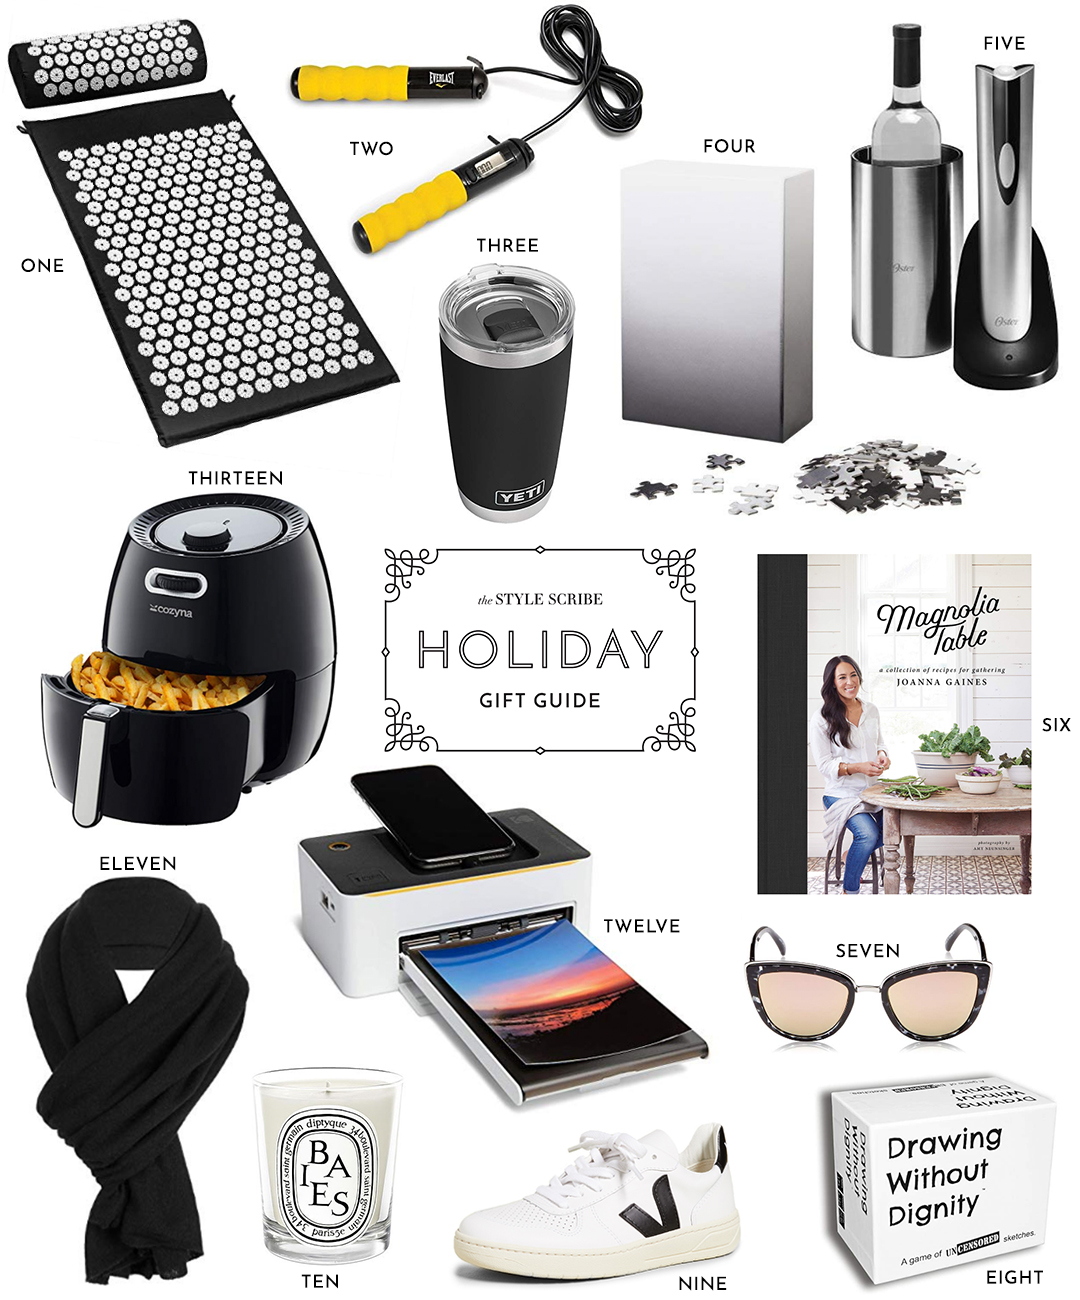 HOLIDAY GIFT GUIDE // BEST LAST MINUTE GIFTS FROM AMAZON